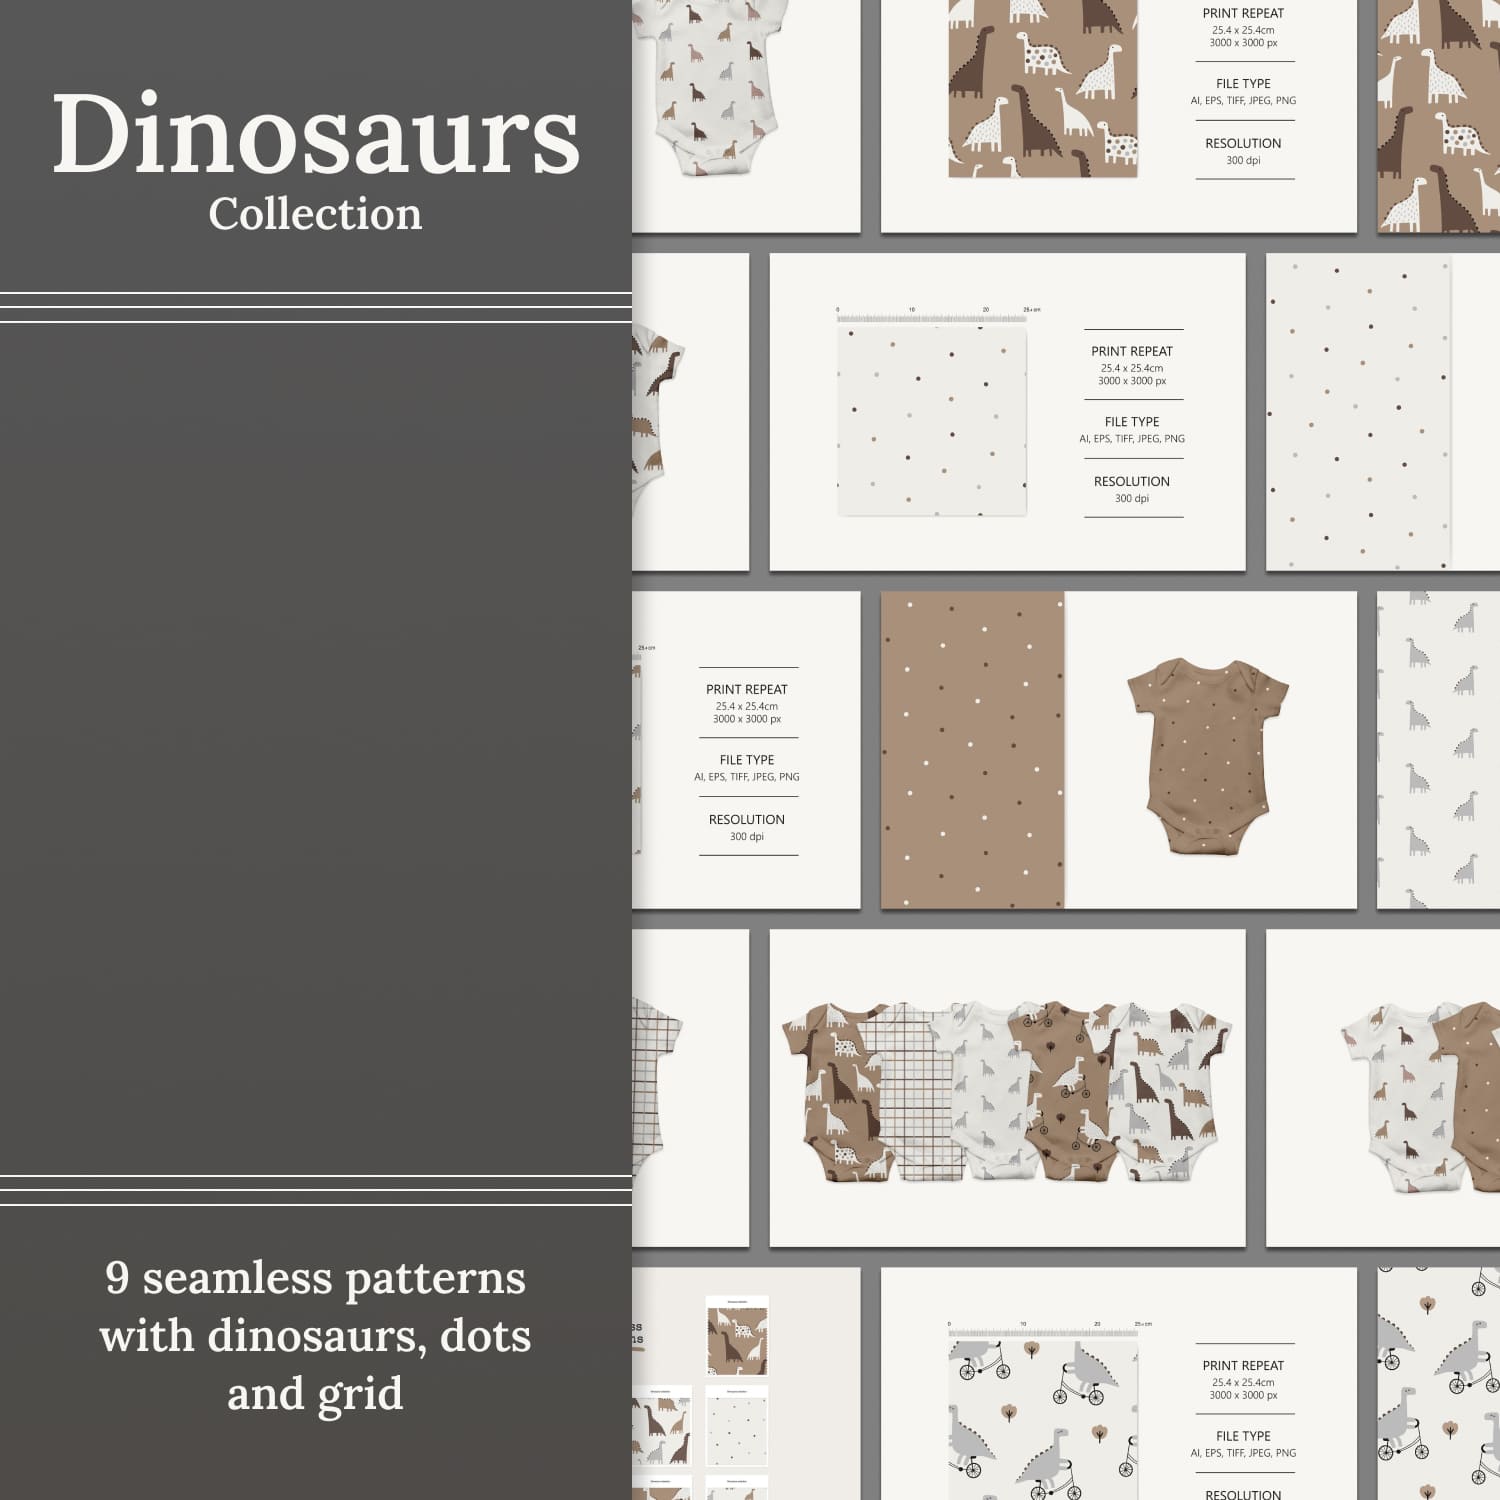 Dinosaurs Seamless Patterns Collection cover image.